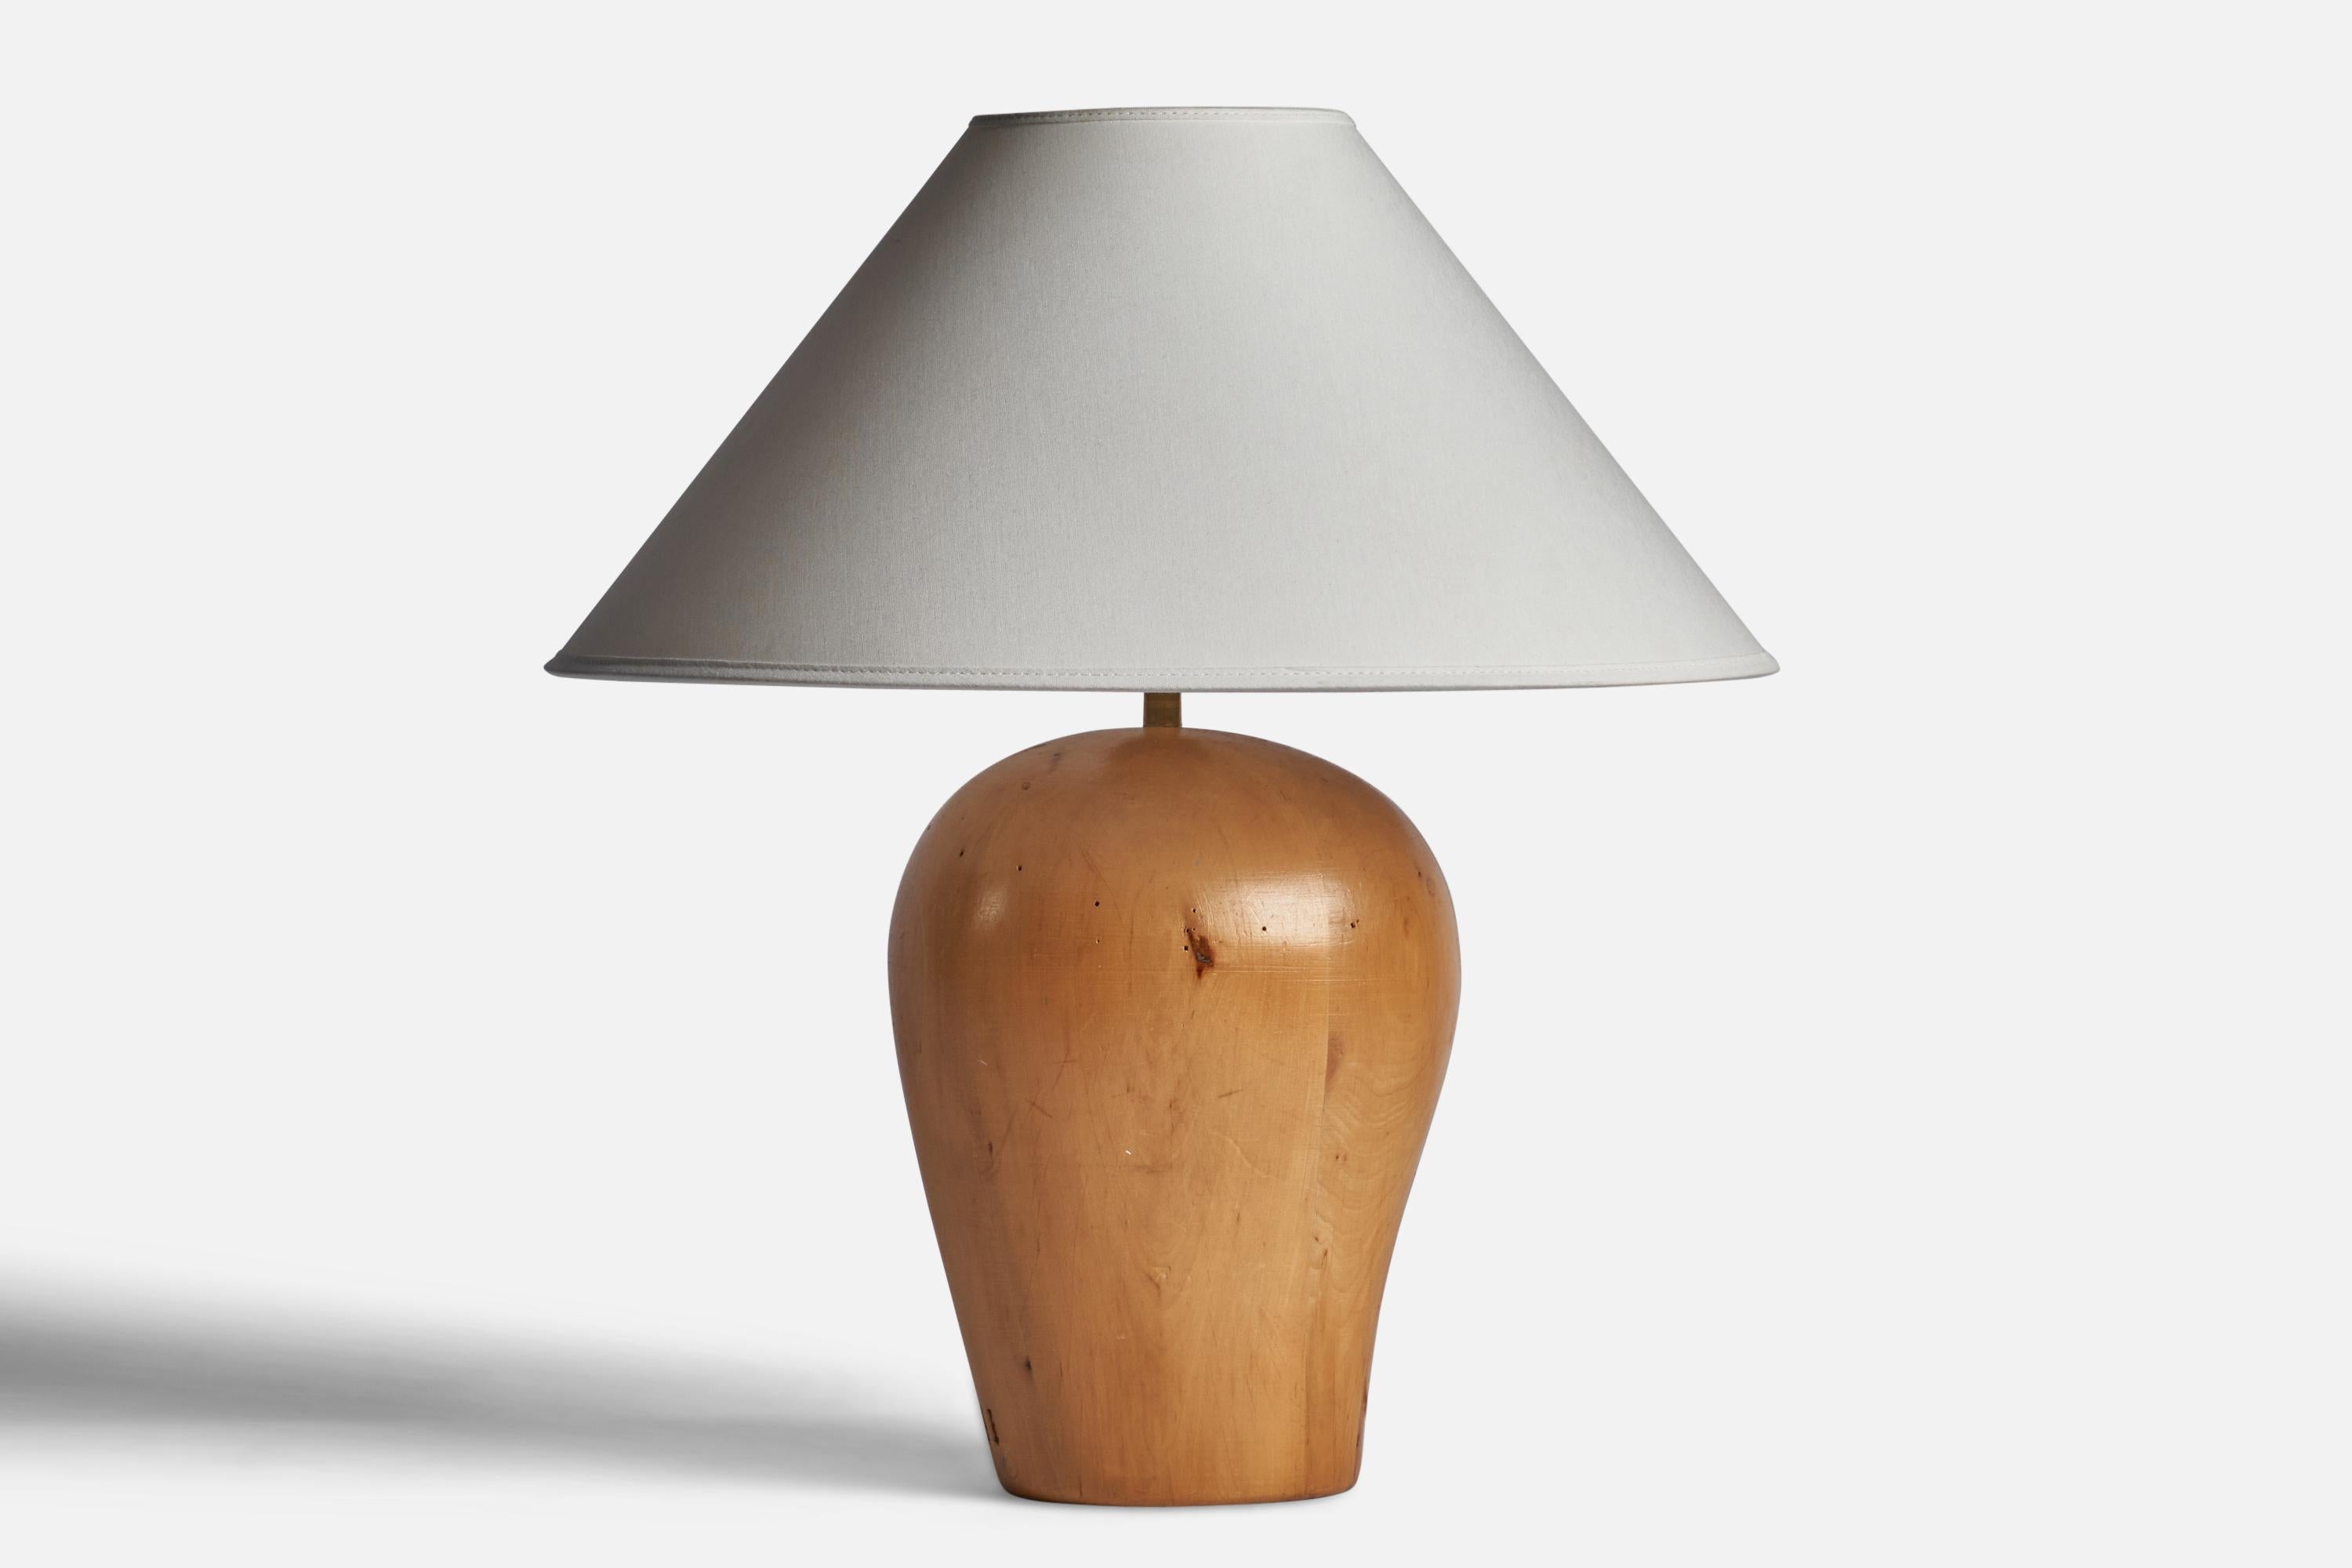 A wood table lamp designed and produced in Sweden, 1940s.

Dimensions of Lamp (inches): 13” H x 7.5” W x 6” D
Dimensions of Shade (inches): 4.5” Top Diameter x 15.75” Bottom Diameter x 9” H
Dimensions of Lamp with Shade (inches): 18.25” H x 15.75”